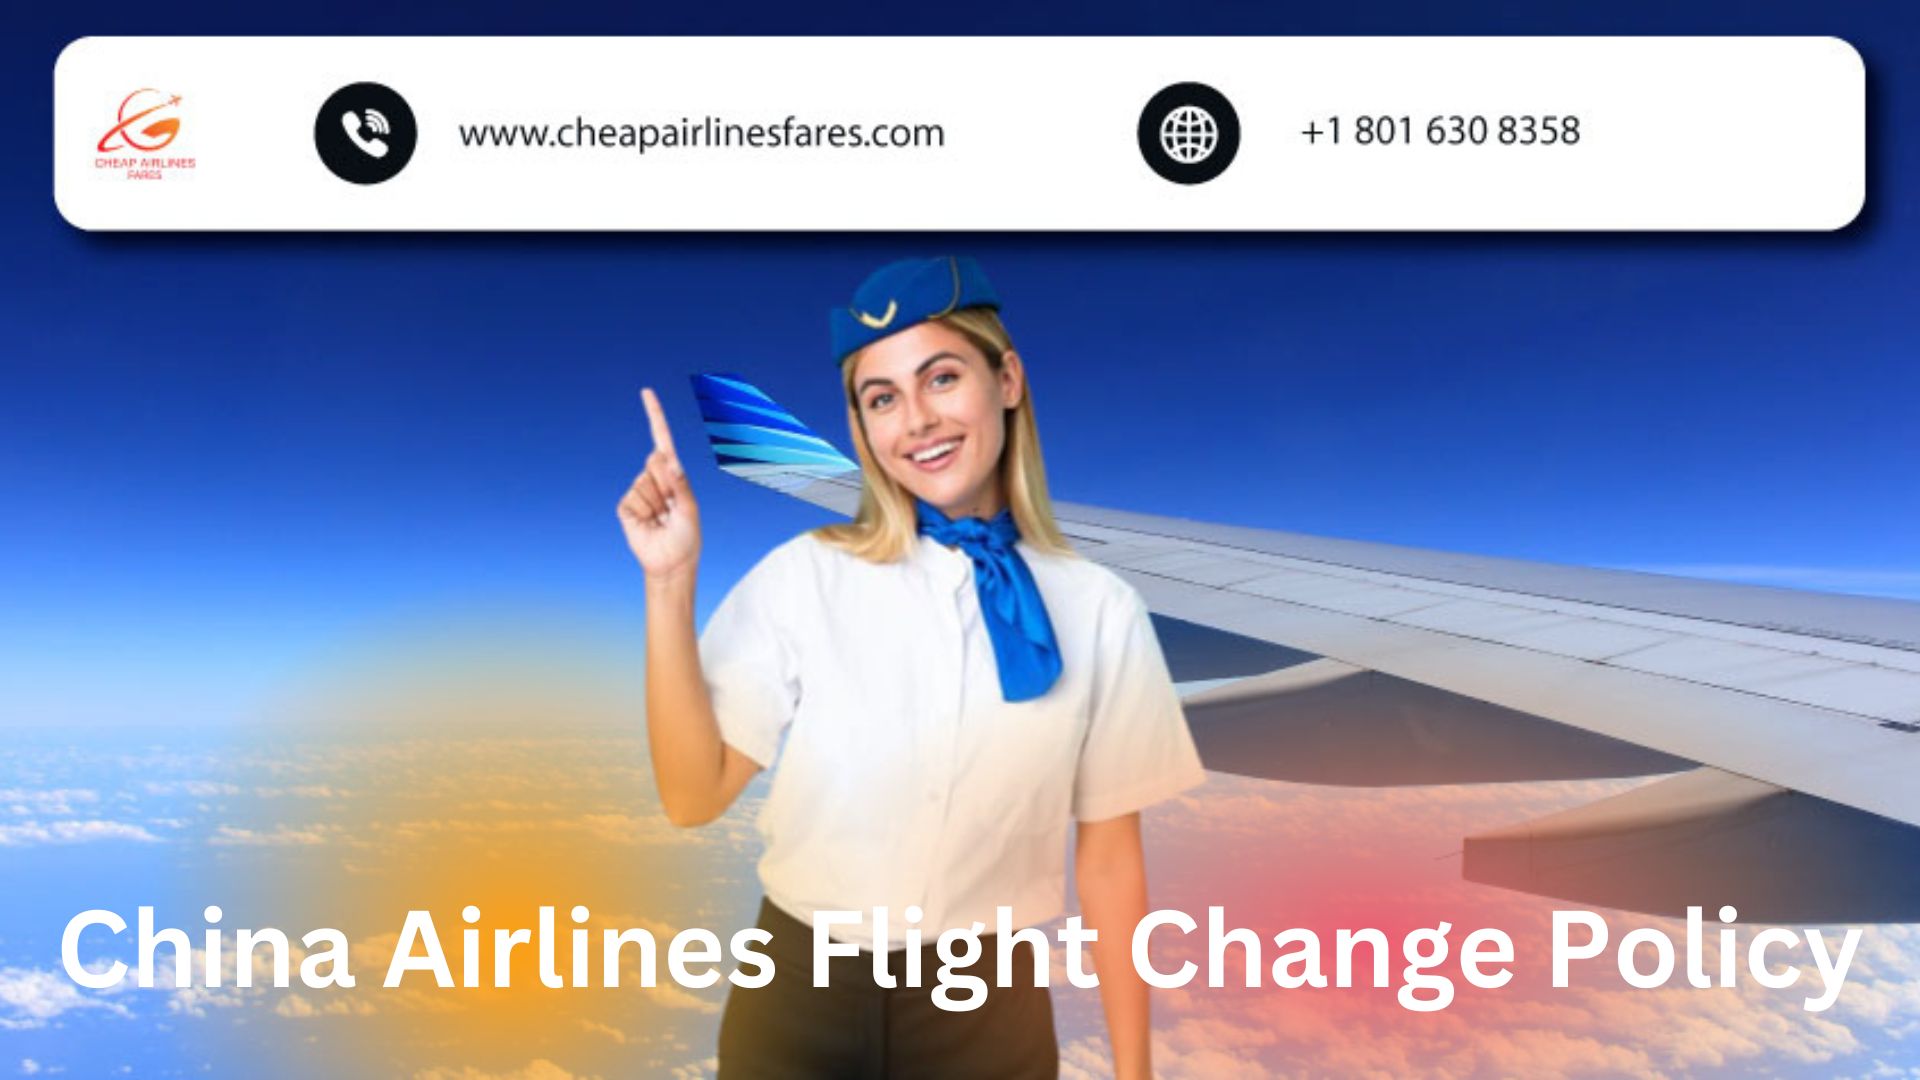 China Airlines Flight Change Policy